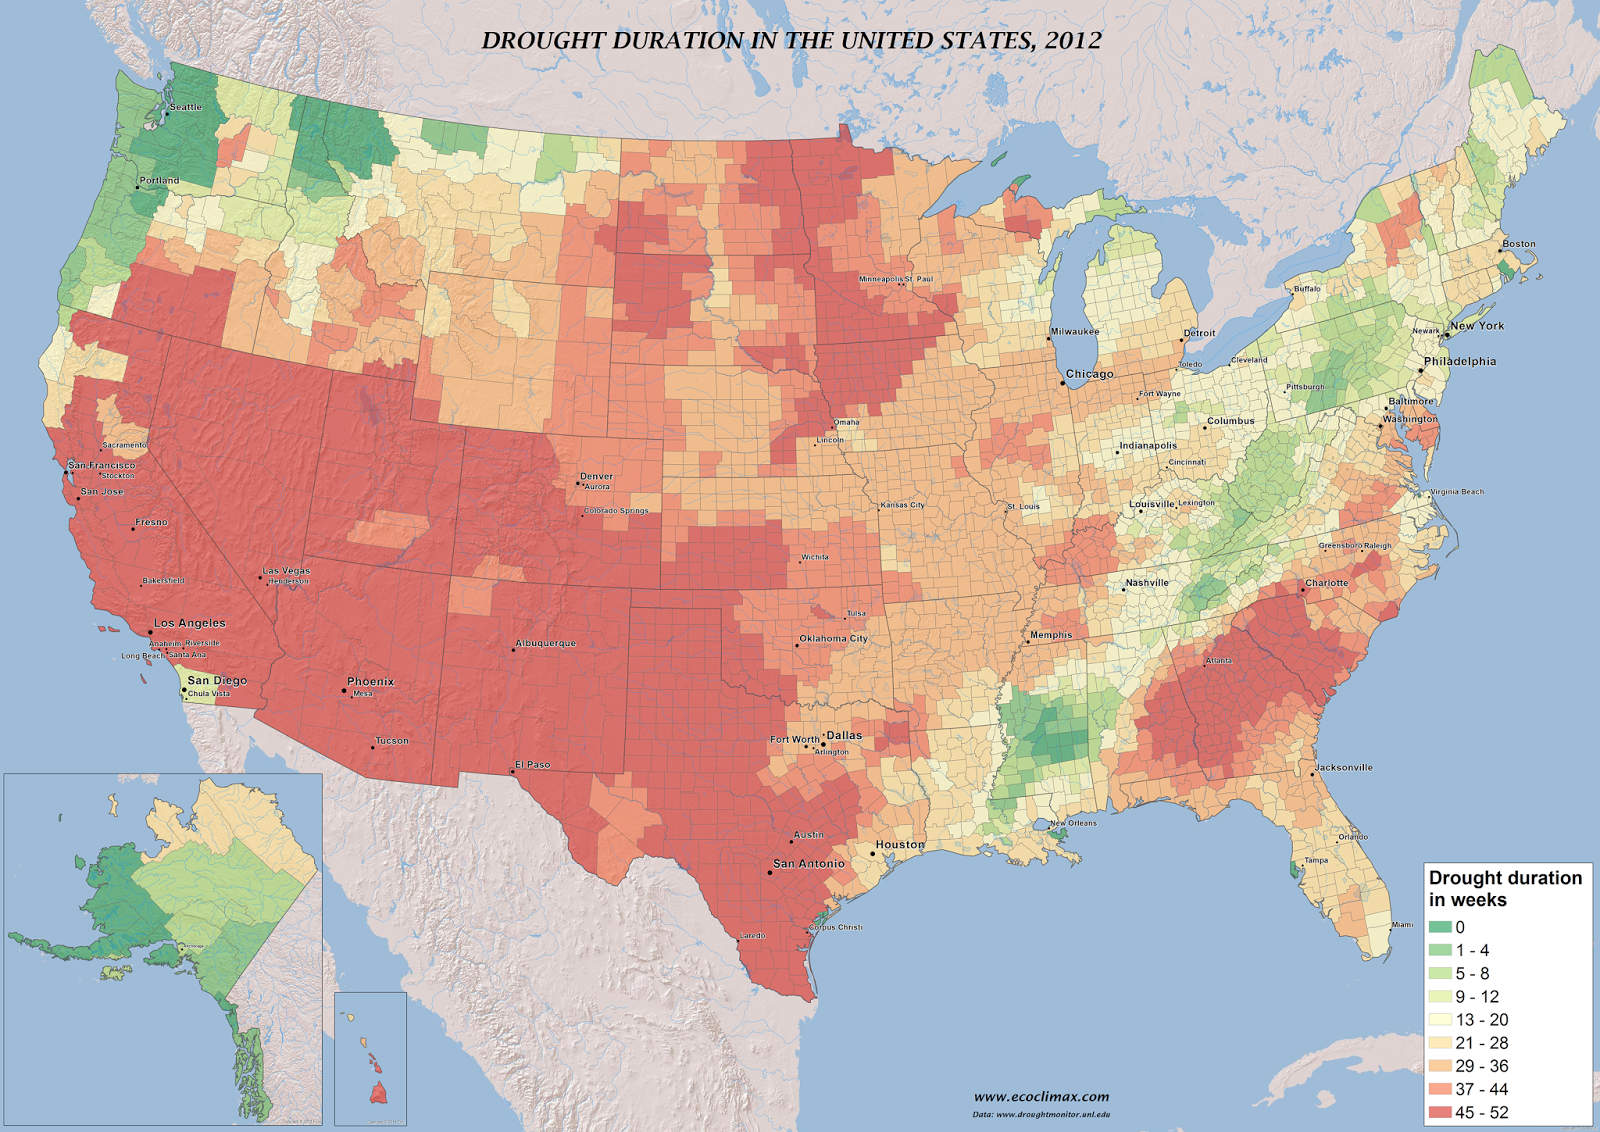  Drought duration in the United States (2011)